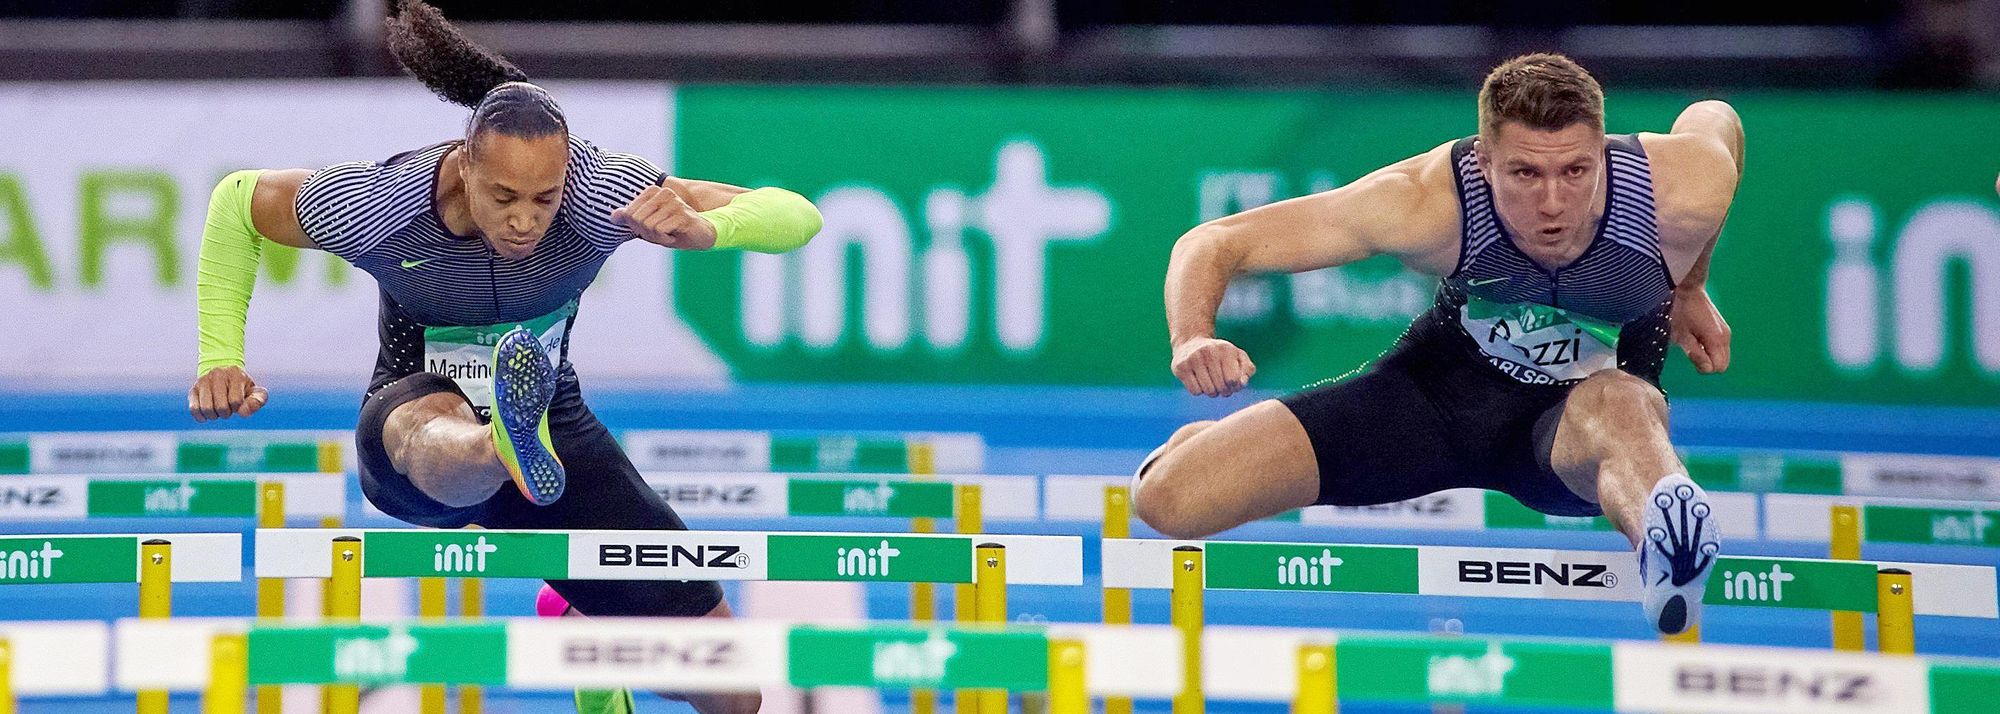 World indoor champion Andrew Pozzi is to open his World Athletics Indoor Tour Gold campaign at the INIT Indoor Meeting Karlsruhe, where he will again go up against world medallist Pascal Martinot-Lagarde.